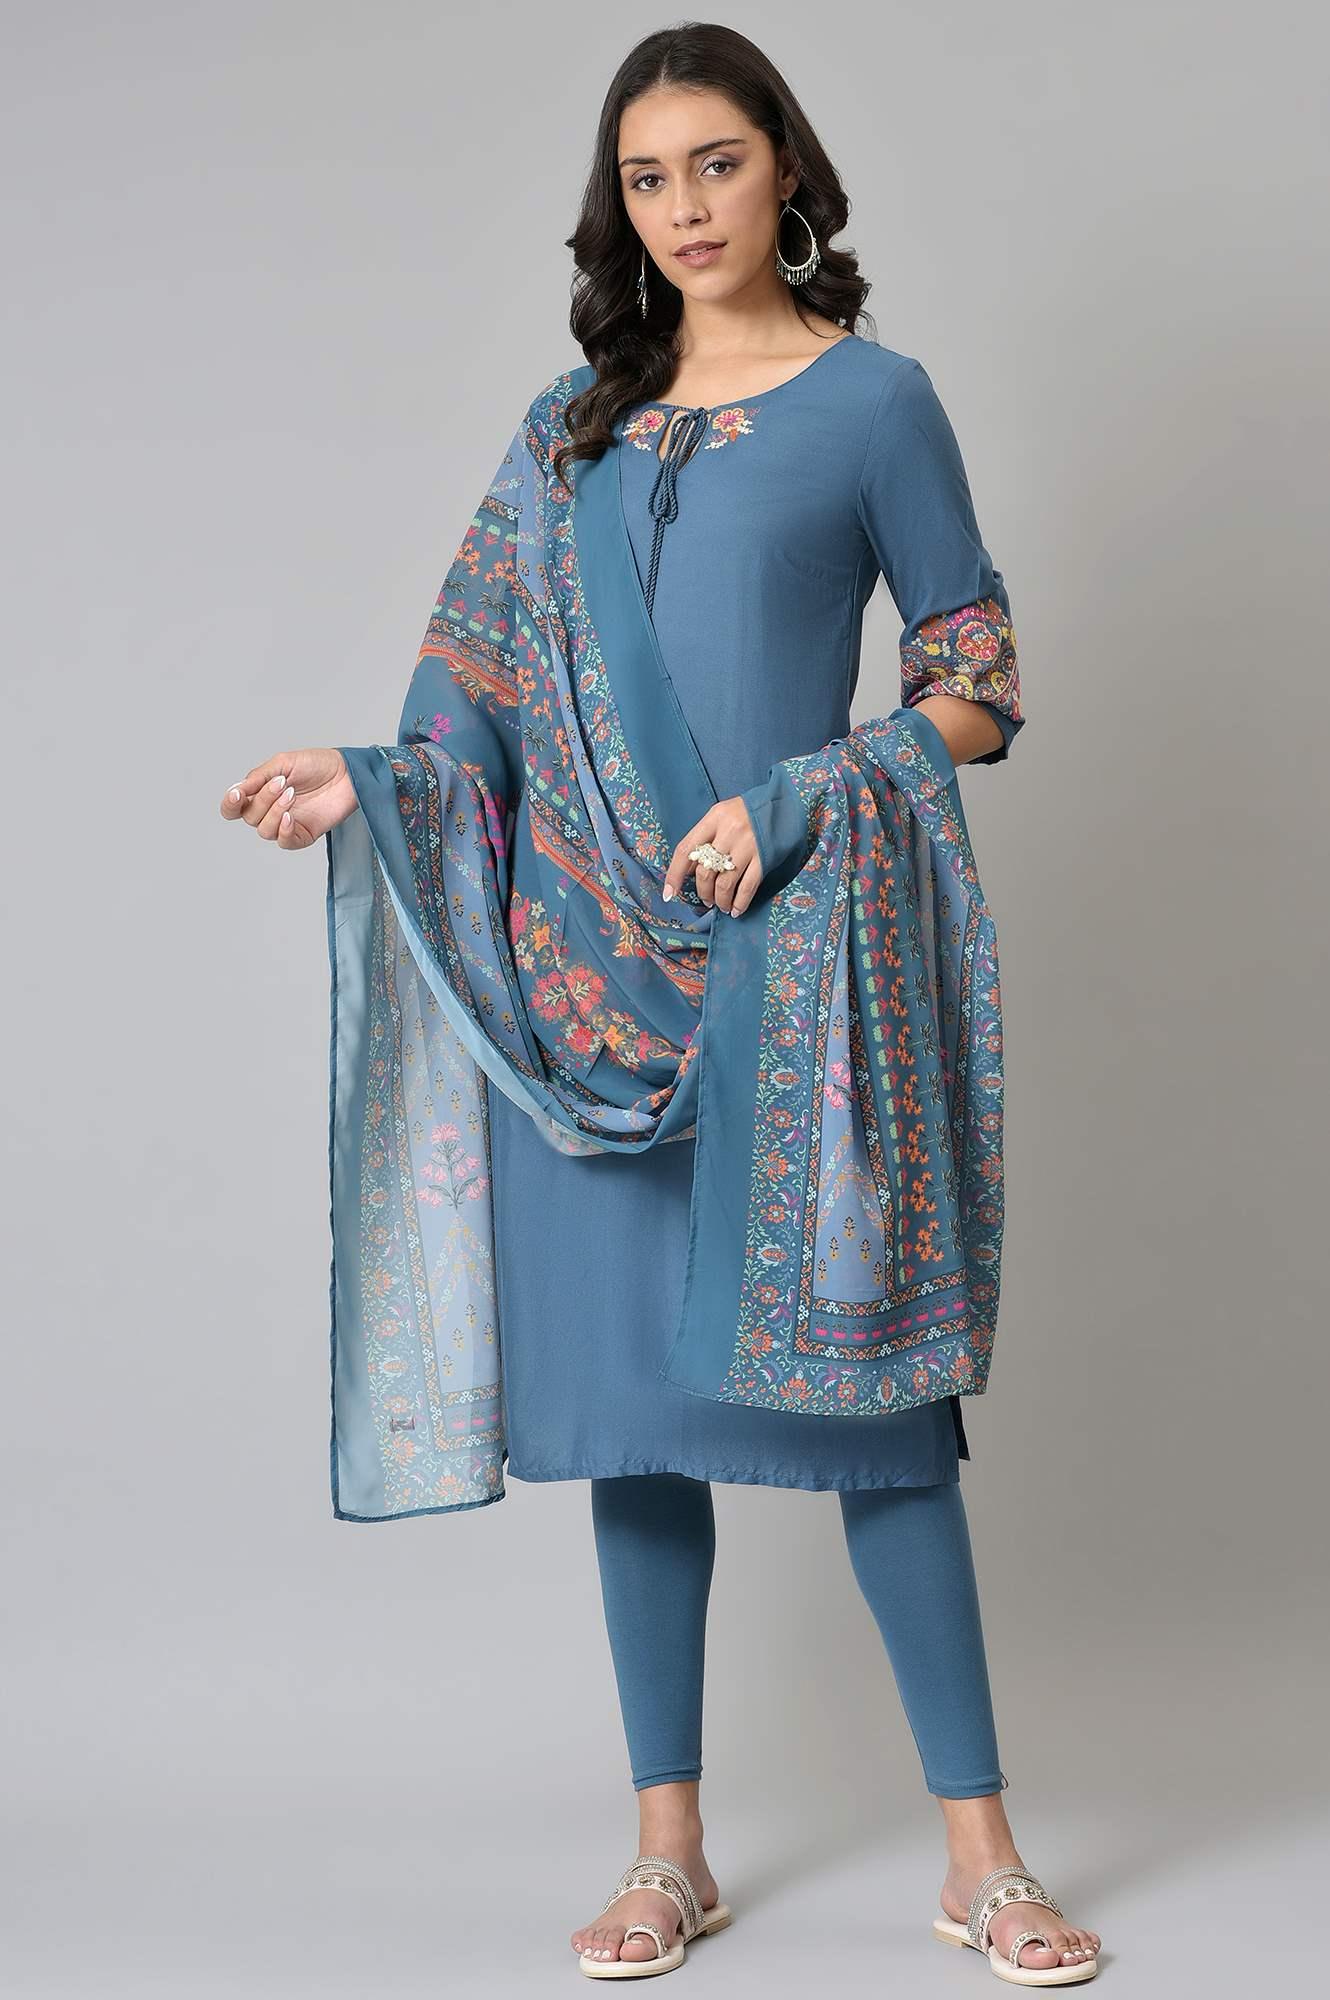 Deep Teal Fusion Embroidered kurta With Knitted Tights And Printed Dupatta - wforwoman